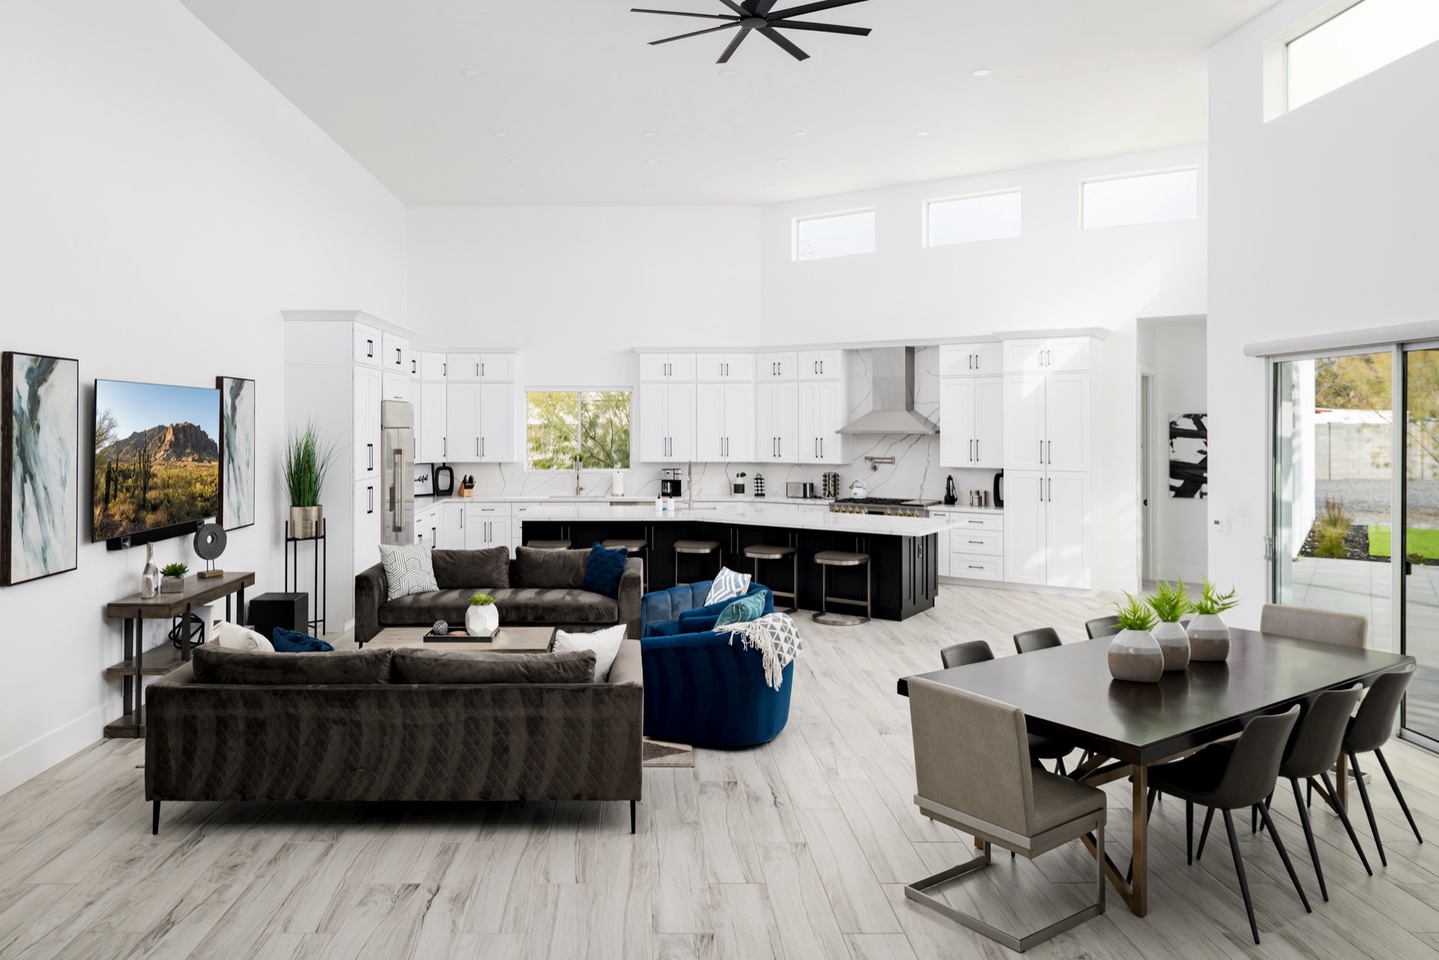 Beautiful open concept design with 15 foot ceilings